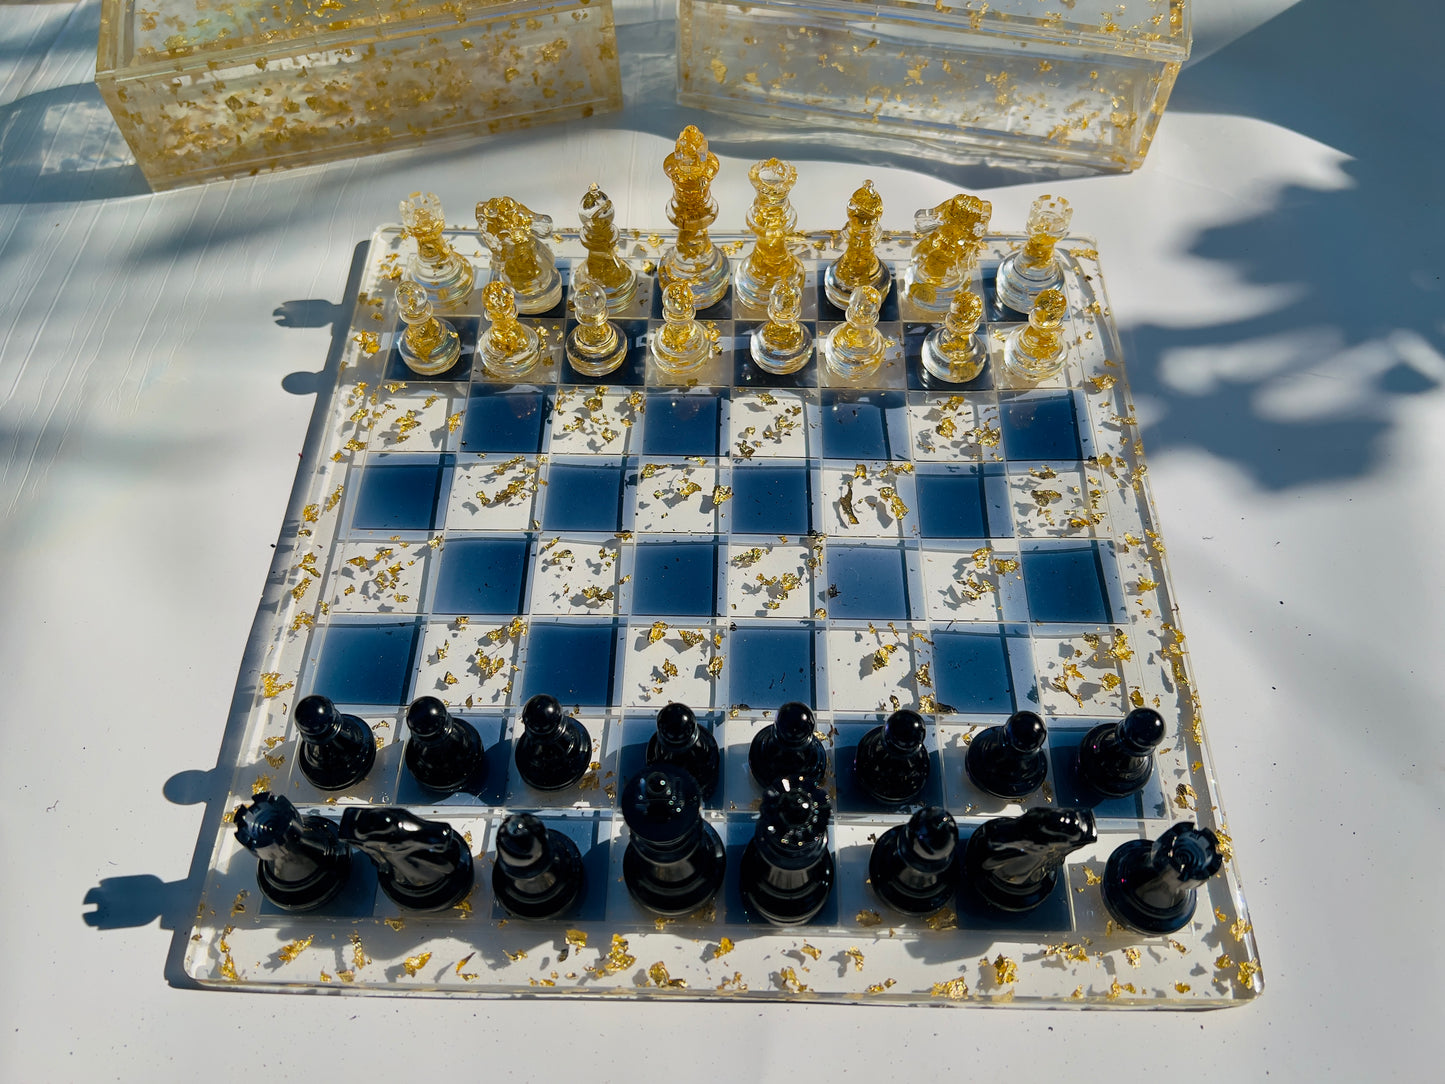 Customizable Midnight Gold Resin Handmade Large Chess Board by Nature's Art Lab